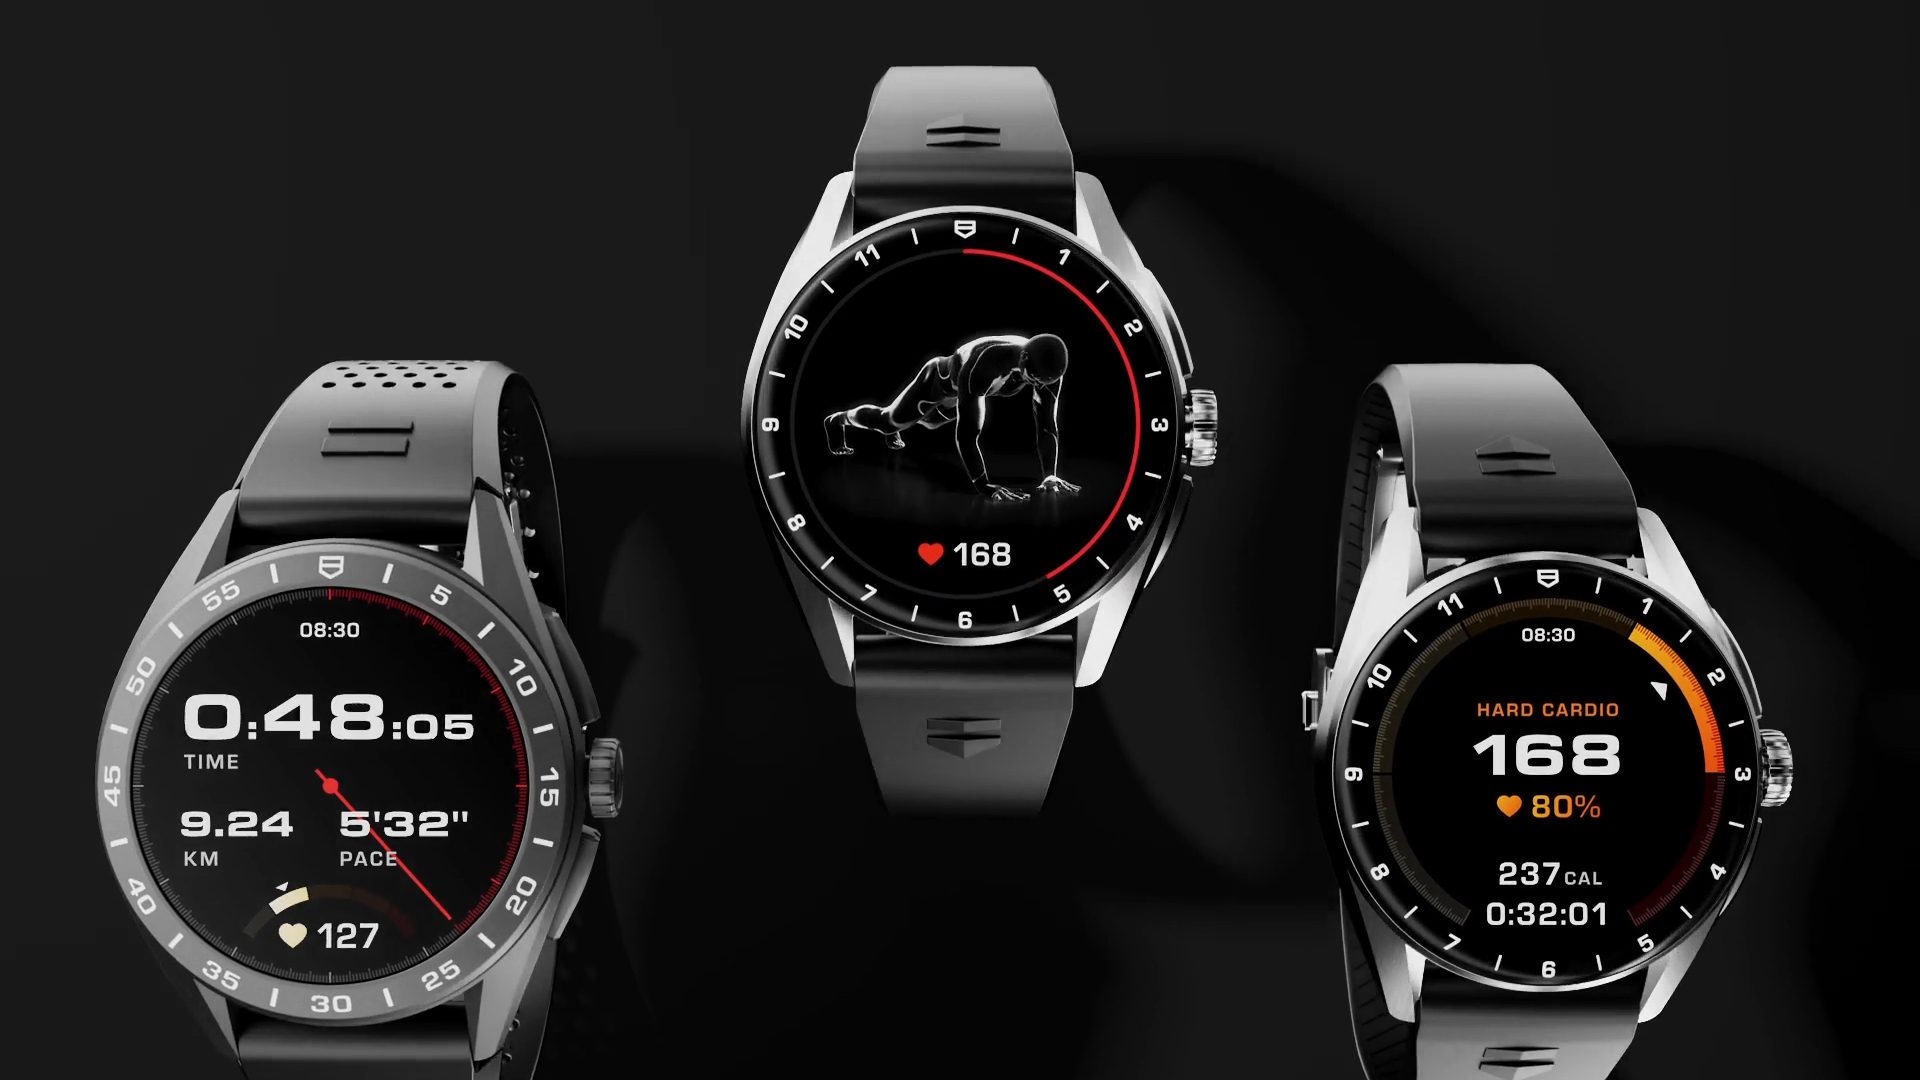 TAG Heuer Connected Calibre E4: Say hello to the virtual coach on your watch